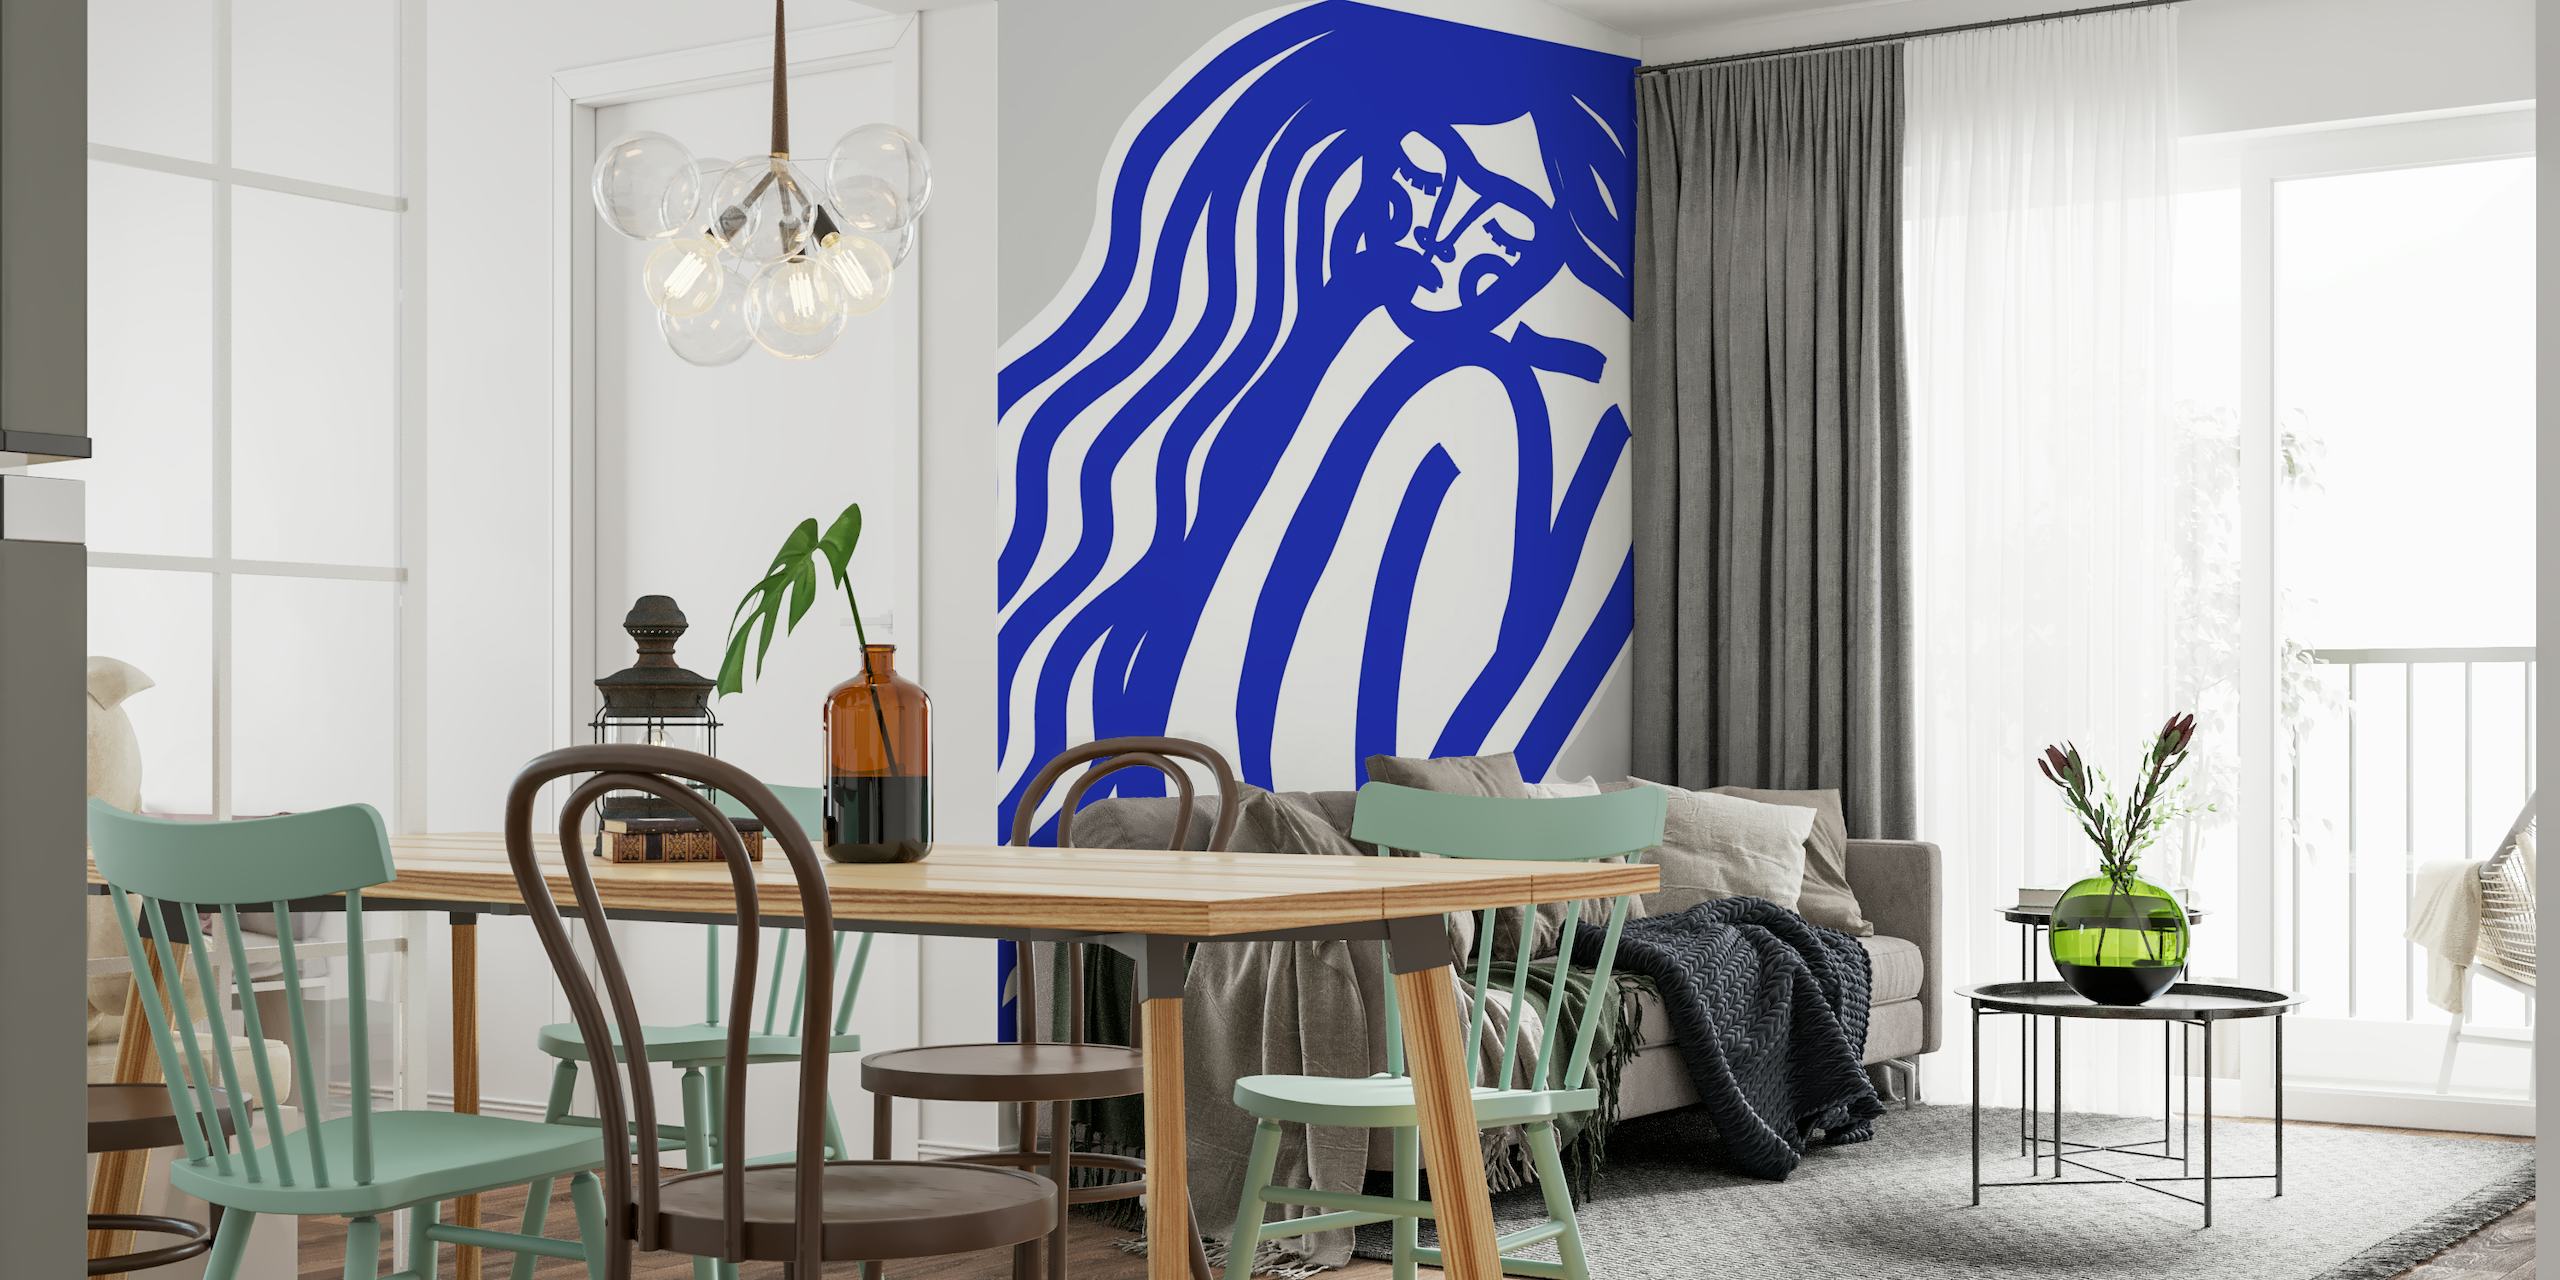 Abstract blue and white wall mural featuring minimalist figures